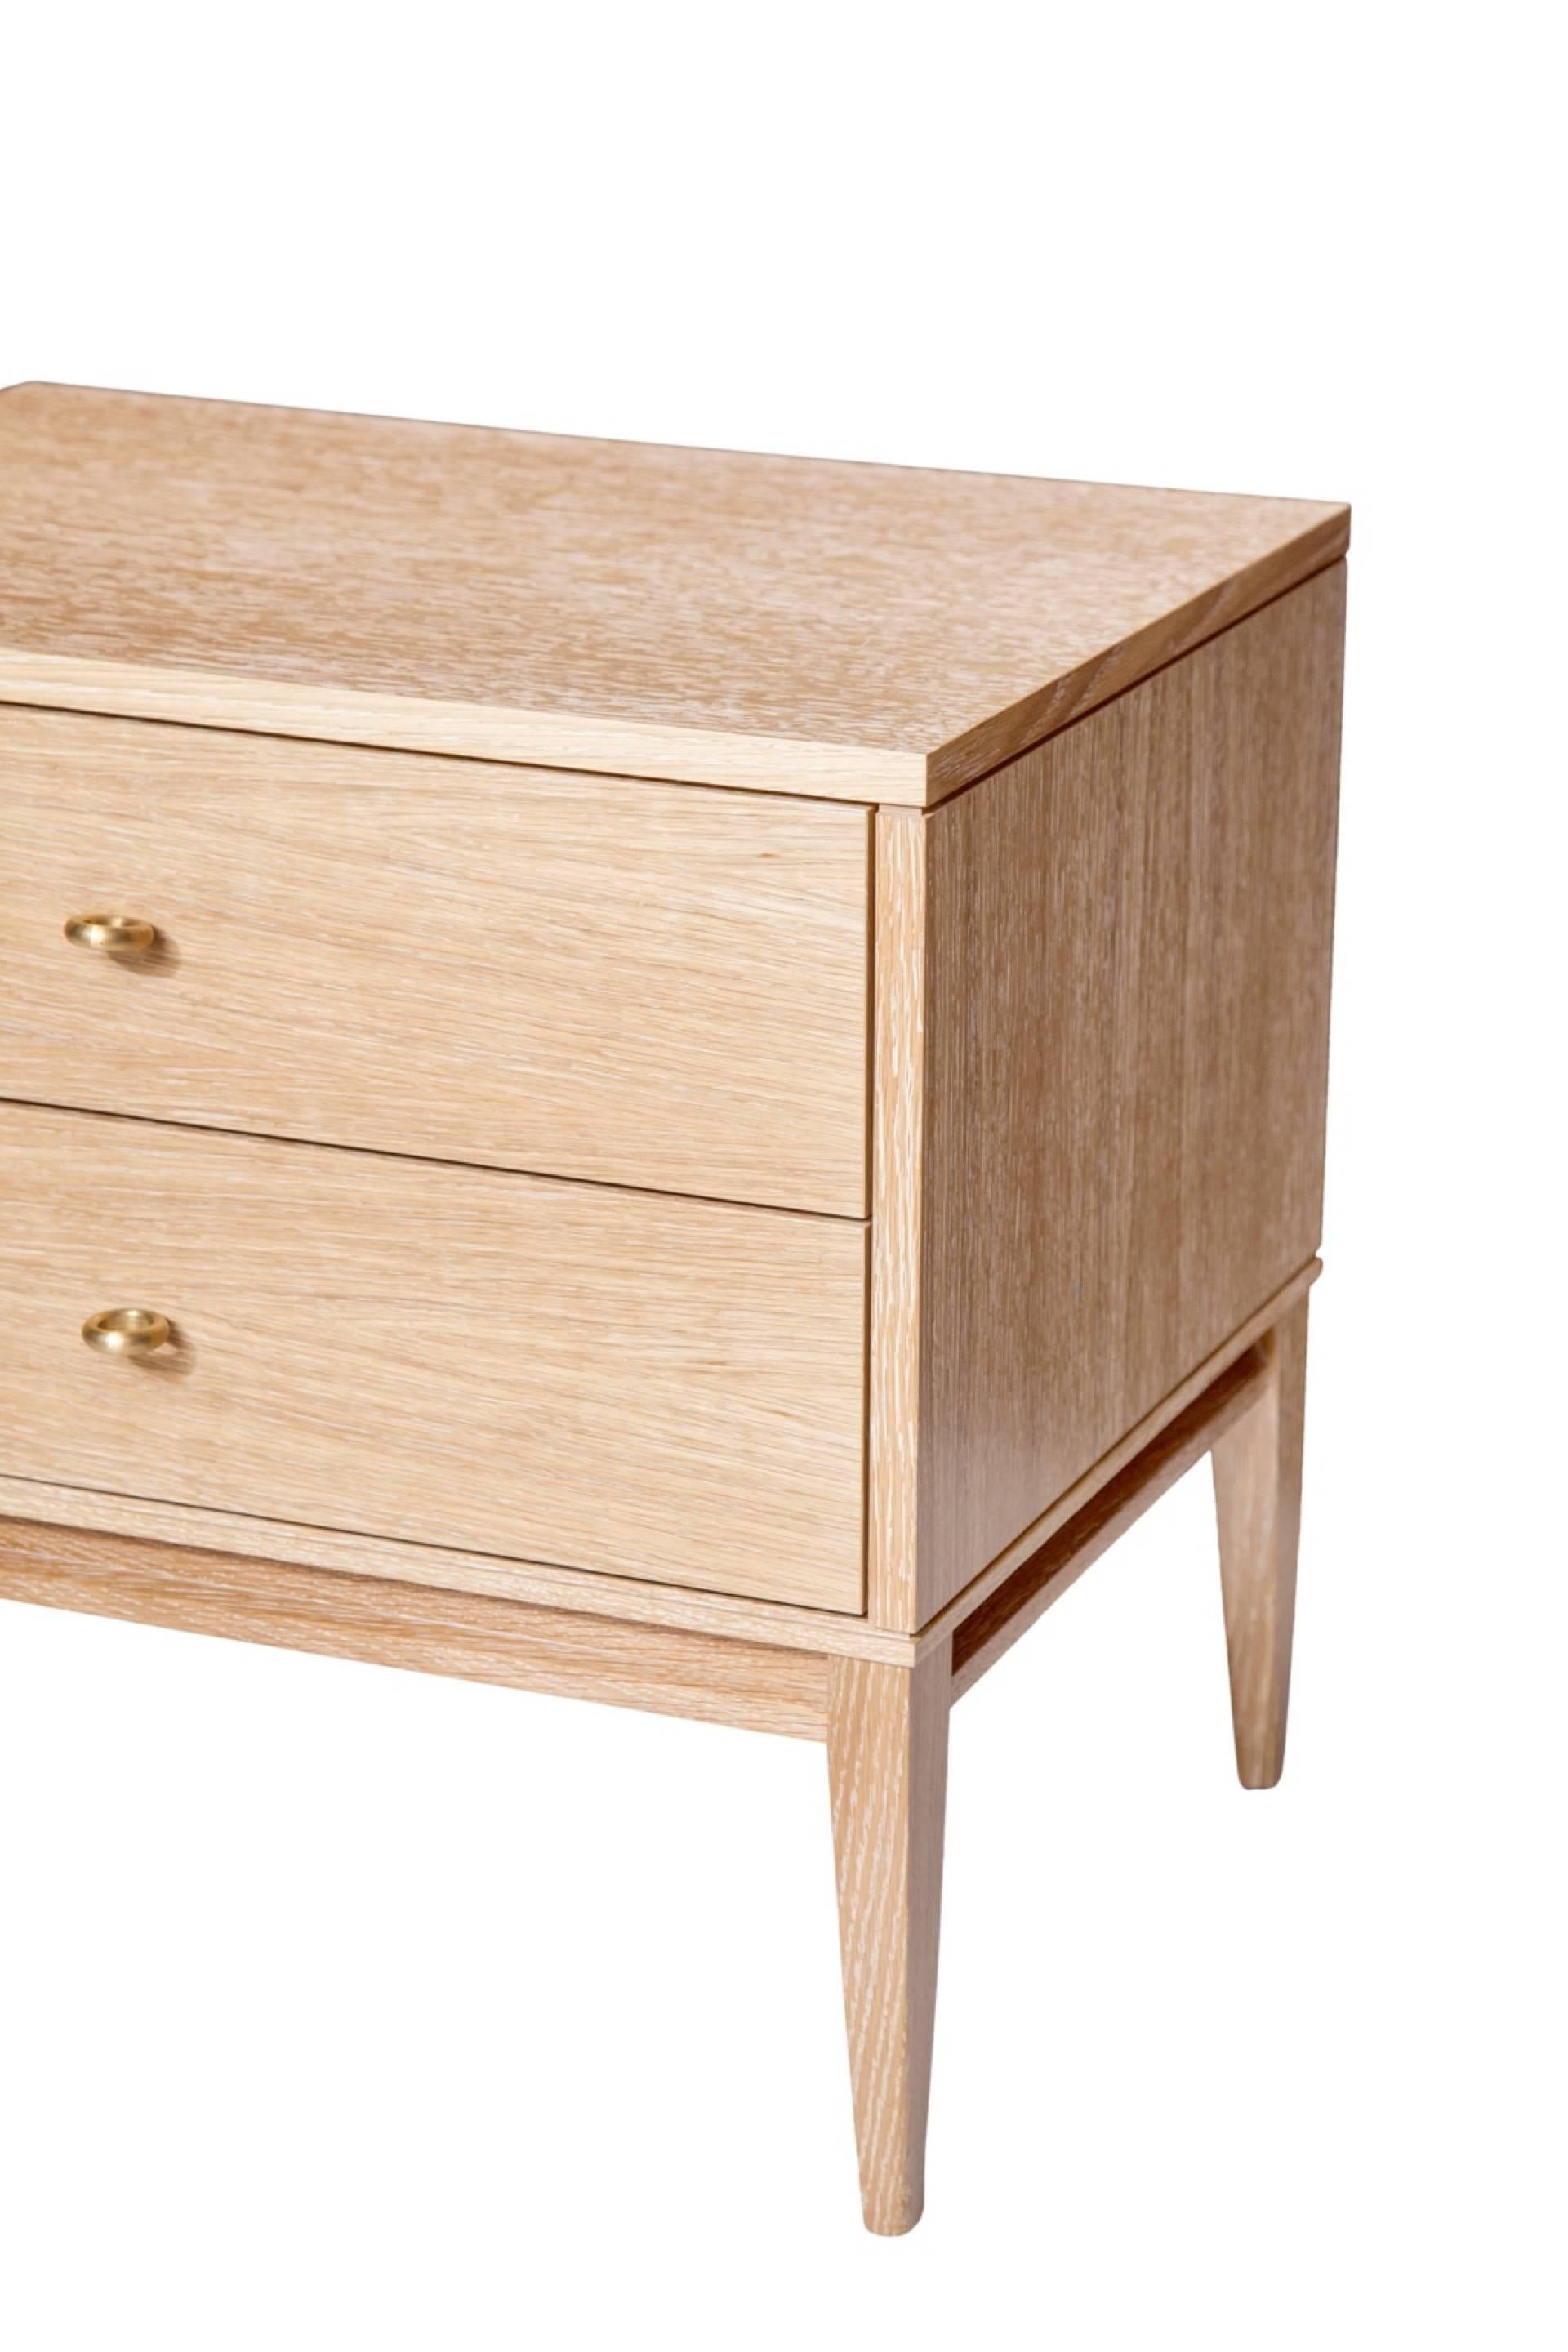 Cerused oak two-drawer nightstands on apron frame base detailed with solid brass drawer pulls. Solid maple drawer boxes with under-mount soft close mechanical drawer slides.
Custom lacquer and wood finishes available.

Custom orders have a lead